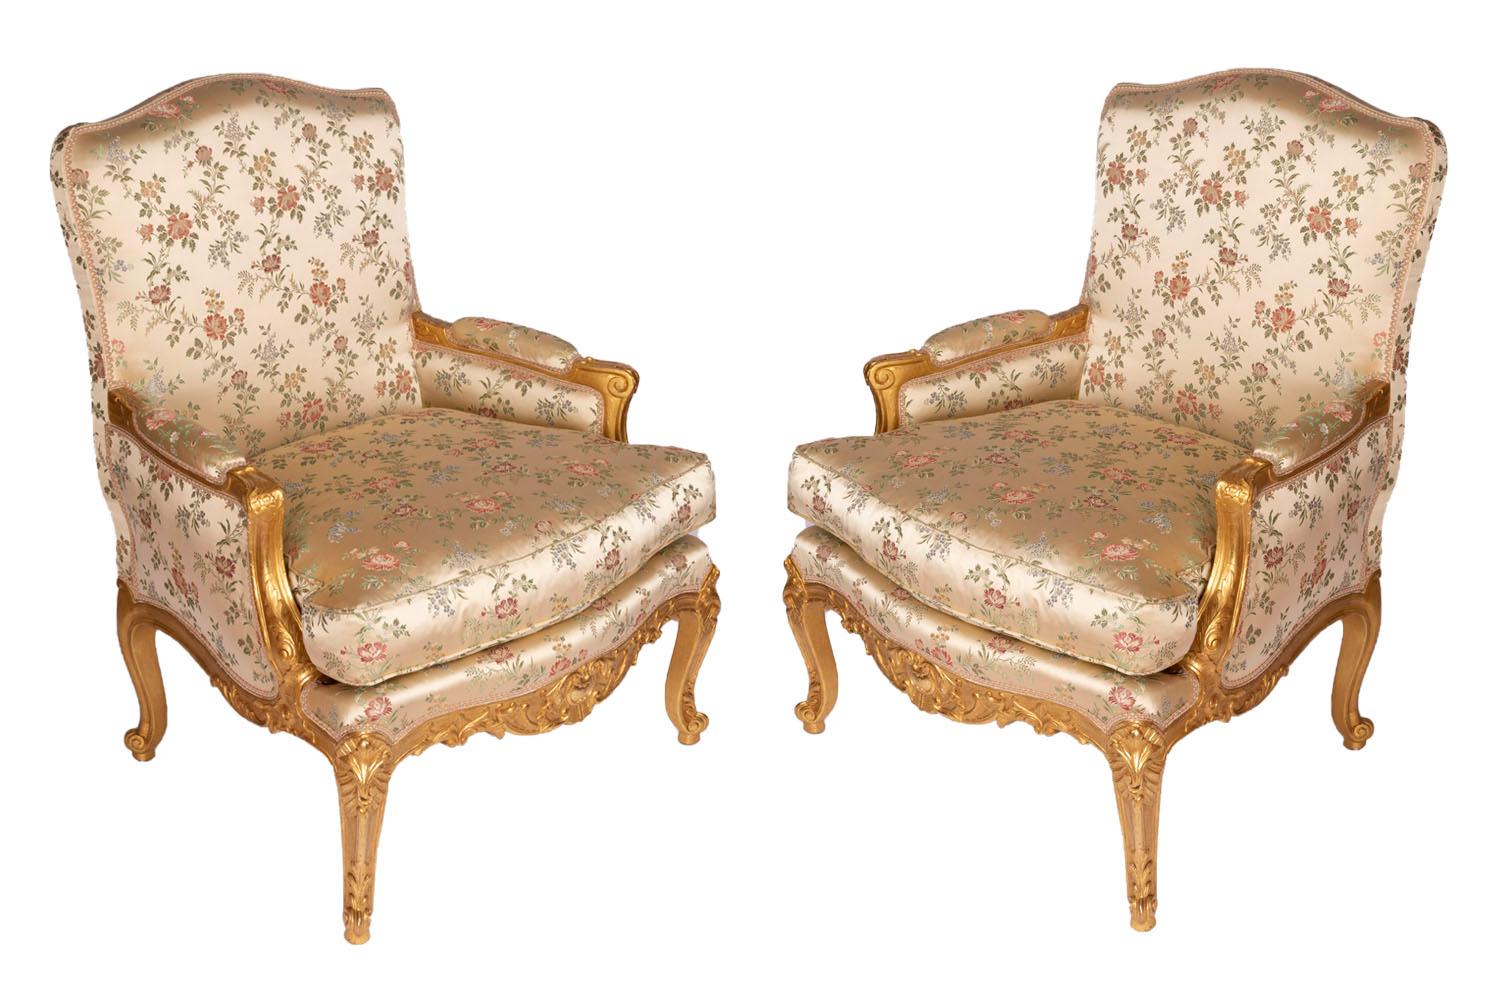 Pair of Louis XV style bergères with a flat back in giltwood, standing on four cabriole legs with an carved decor of acanthus leaves and scrolls. Apron slightly bulged with a carved decor of acanthus leaves, cartouche and shell. Arm supports behind